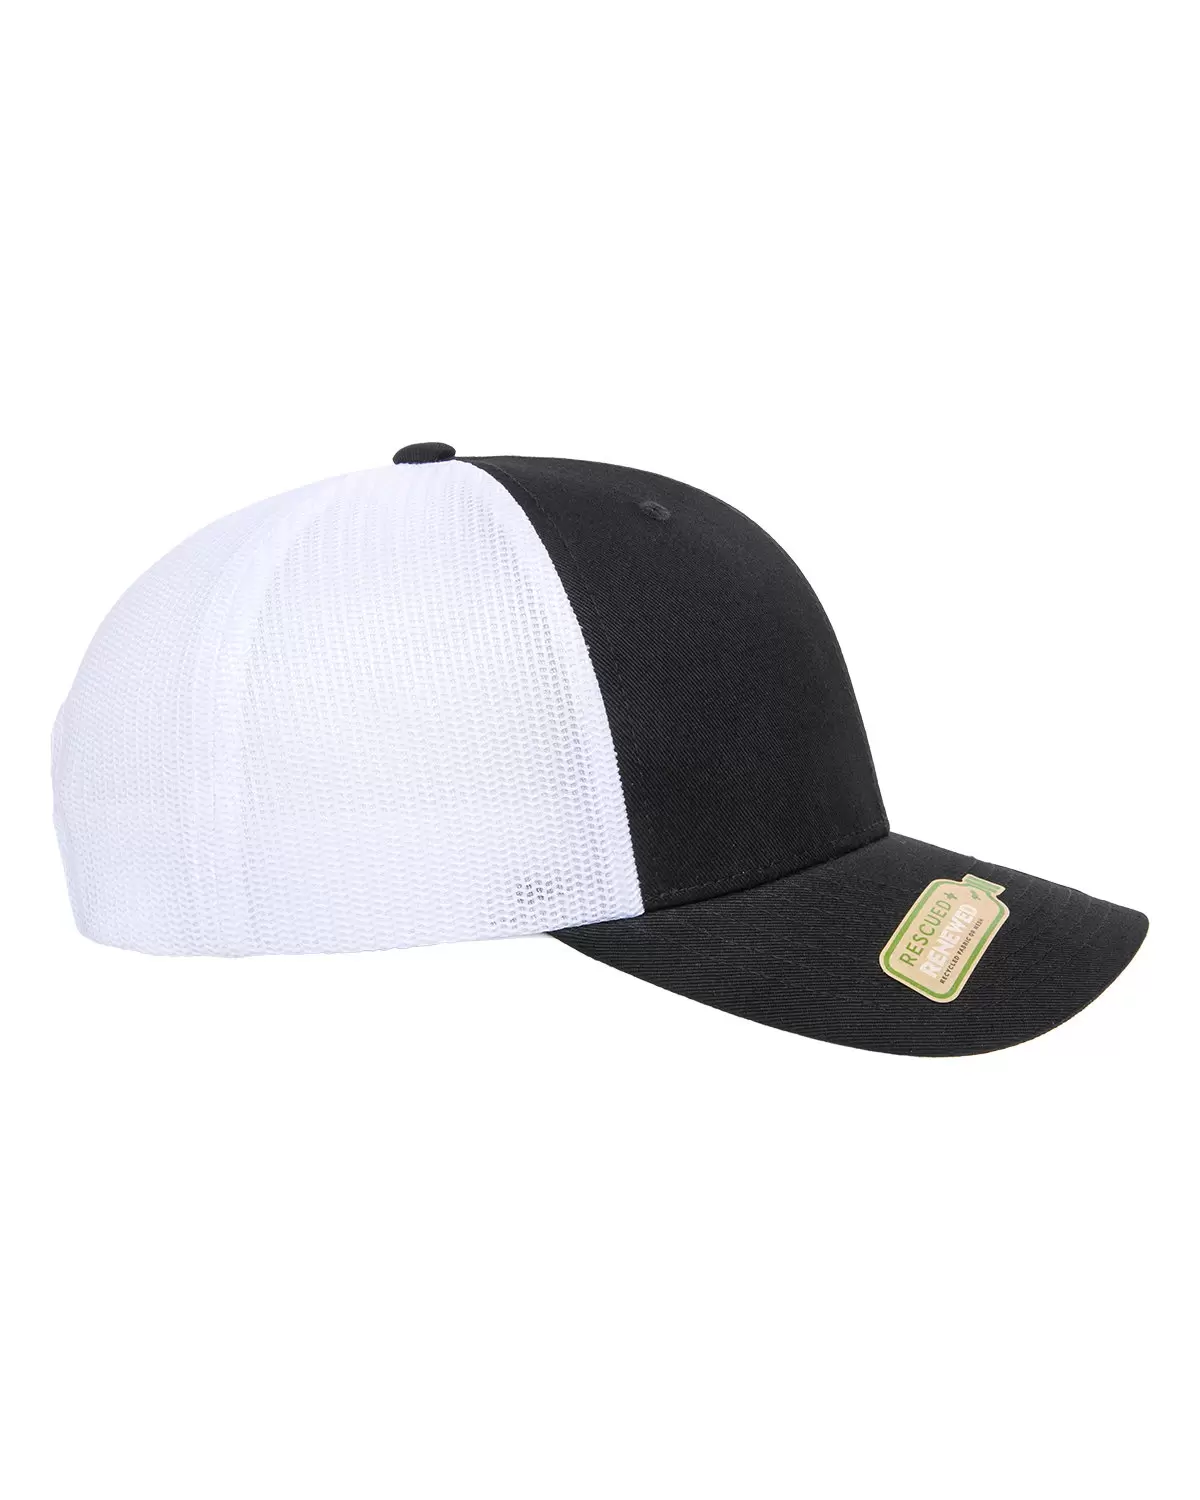 Yupoong-Flex Fit 6606R Sustainable Retro Trucker Cap - From